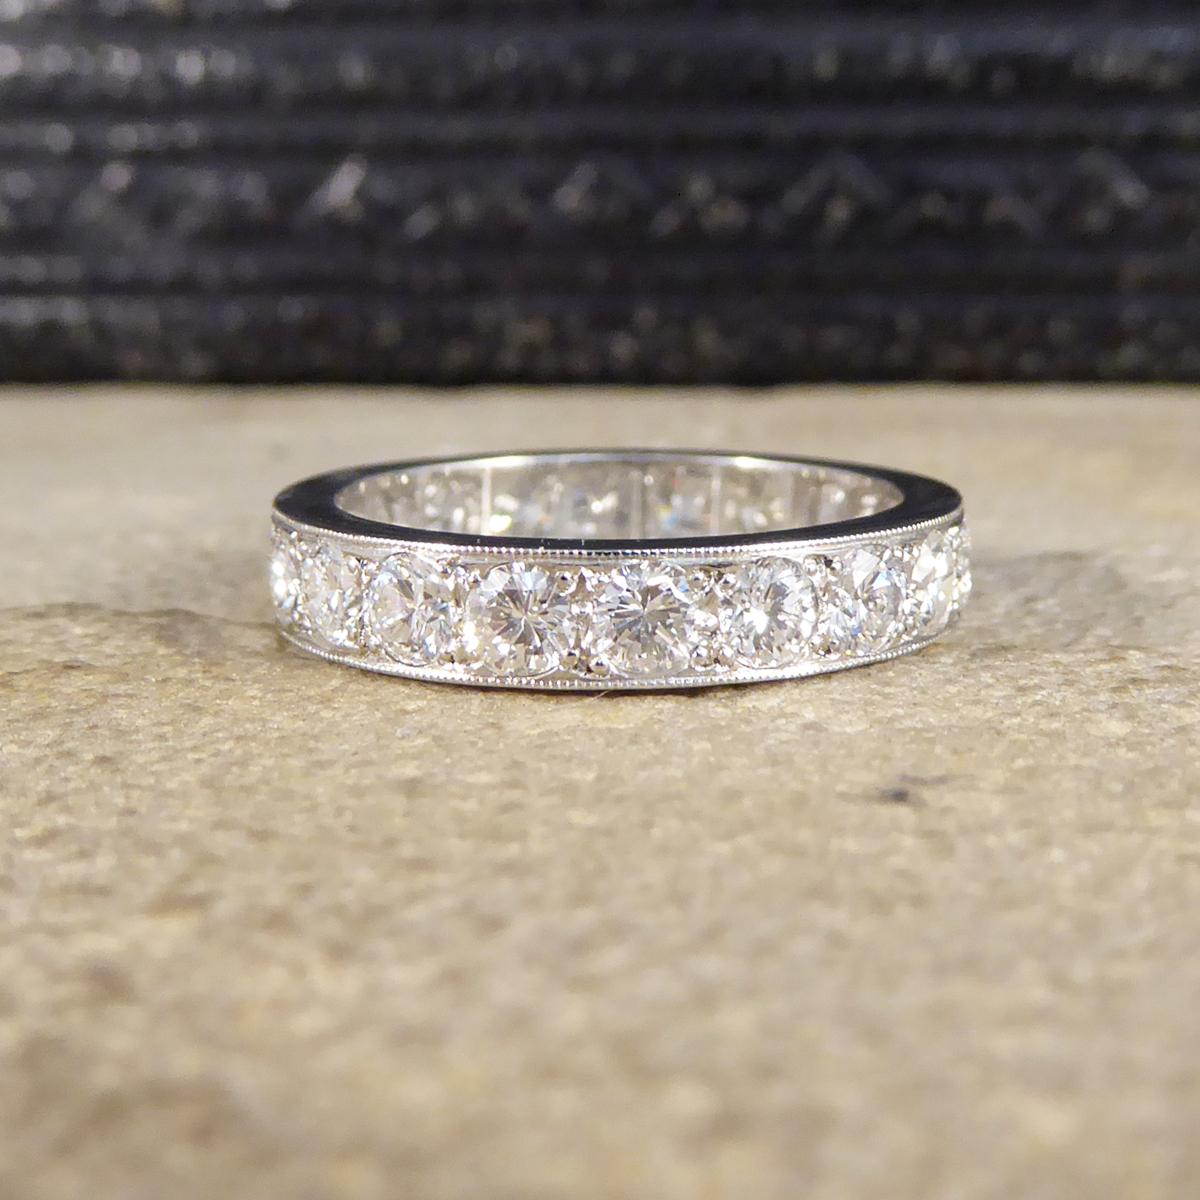 Dare to dazzle with this alluring contemporary eternity ring modelled in Platinum. It features 20 Brilliant Cut Diamonds weighing a total of 2.11ct, and sparkles from every angle.

Diamond Details:
Cut: Brilliant Cut
Carat: 2.52ct total
Colour: